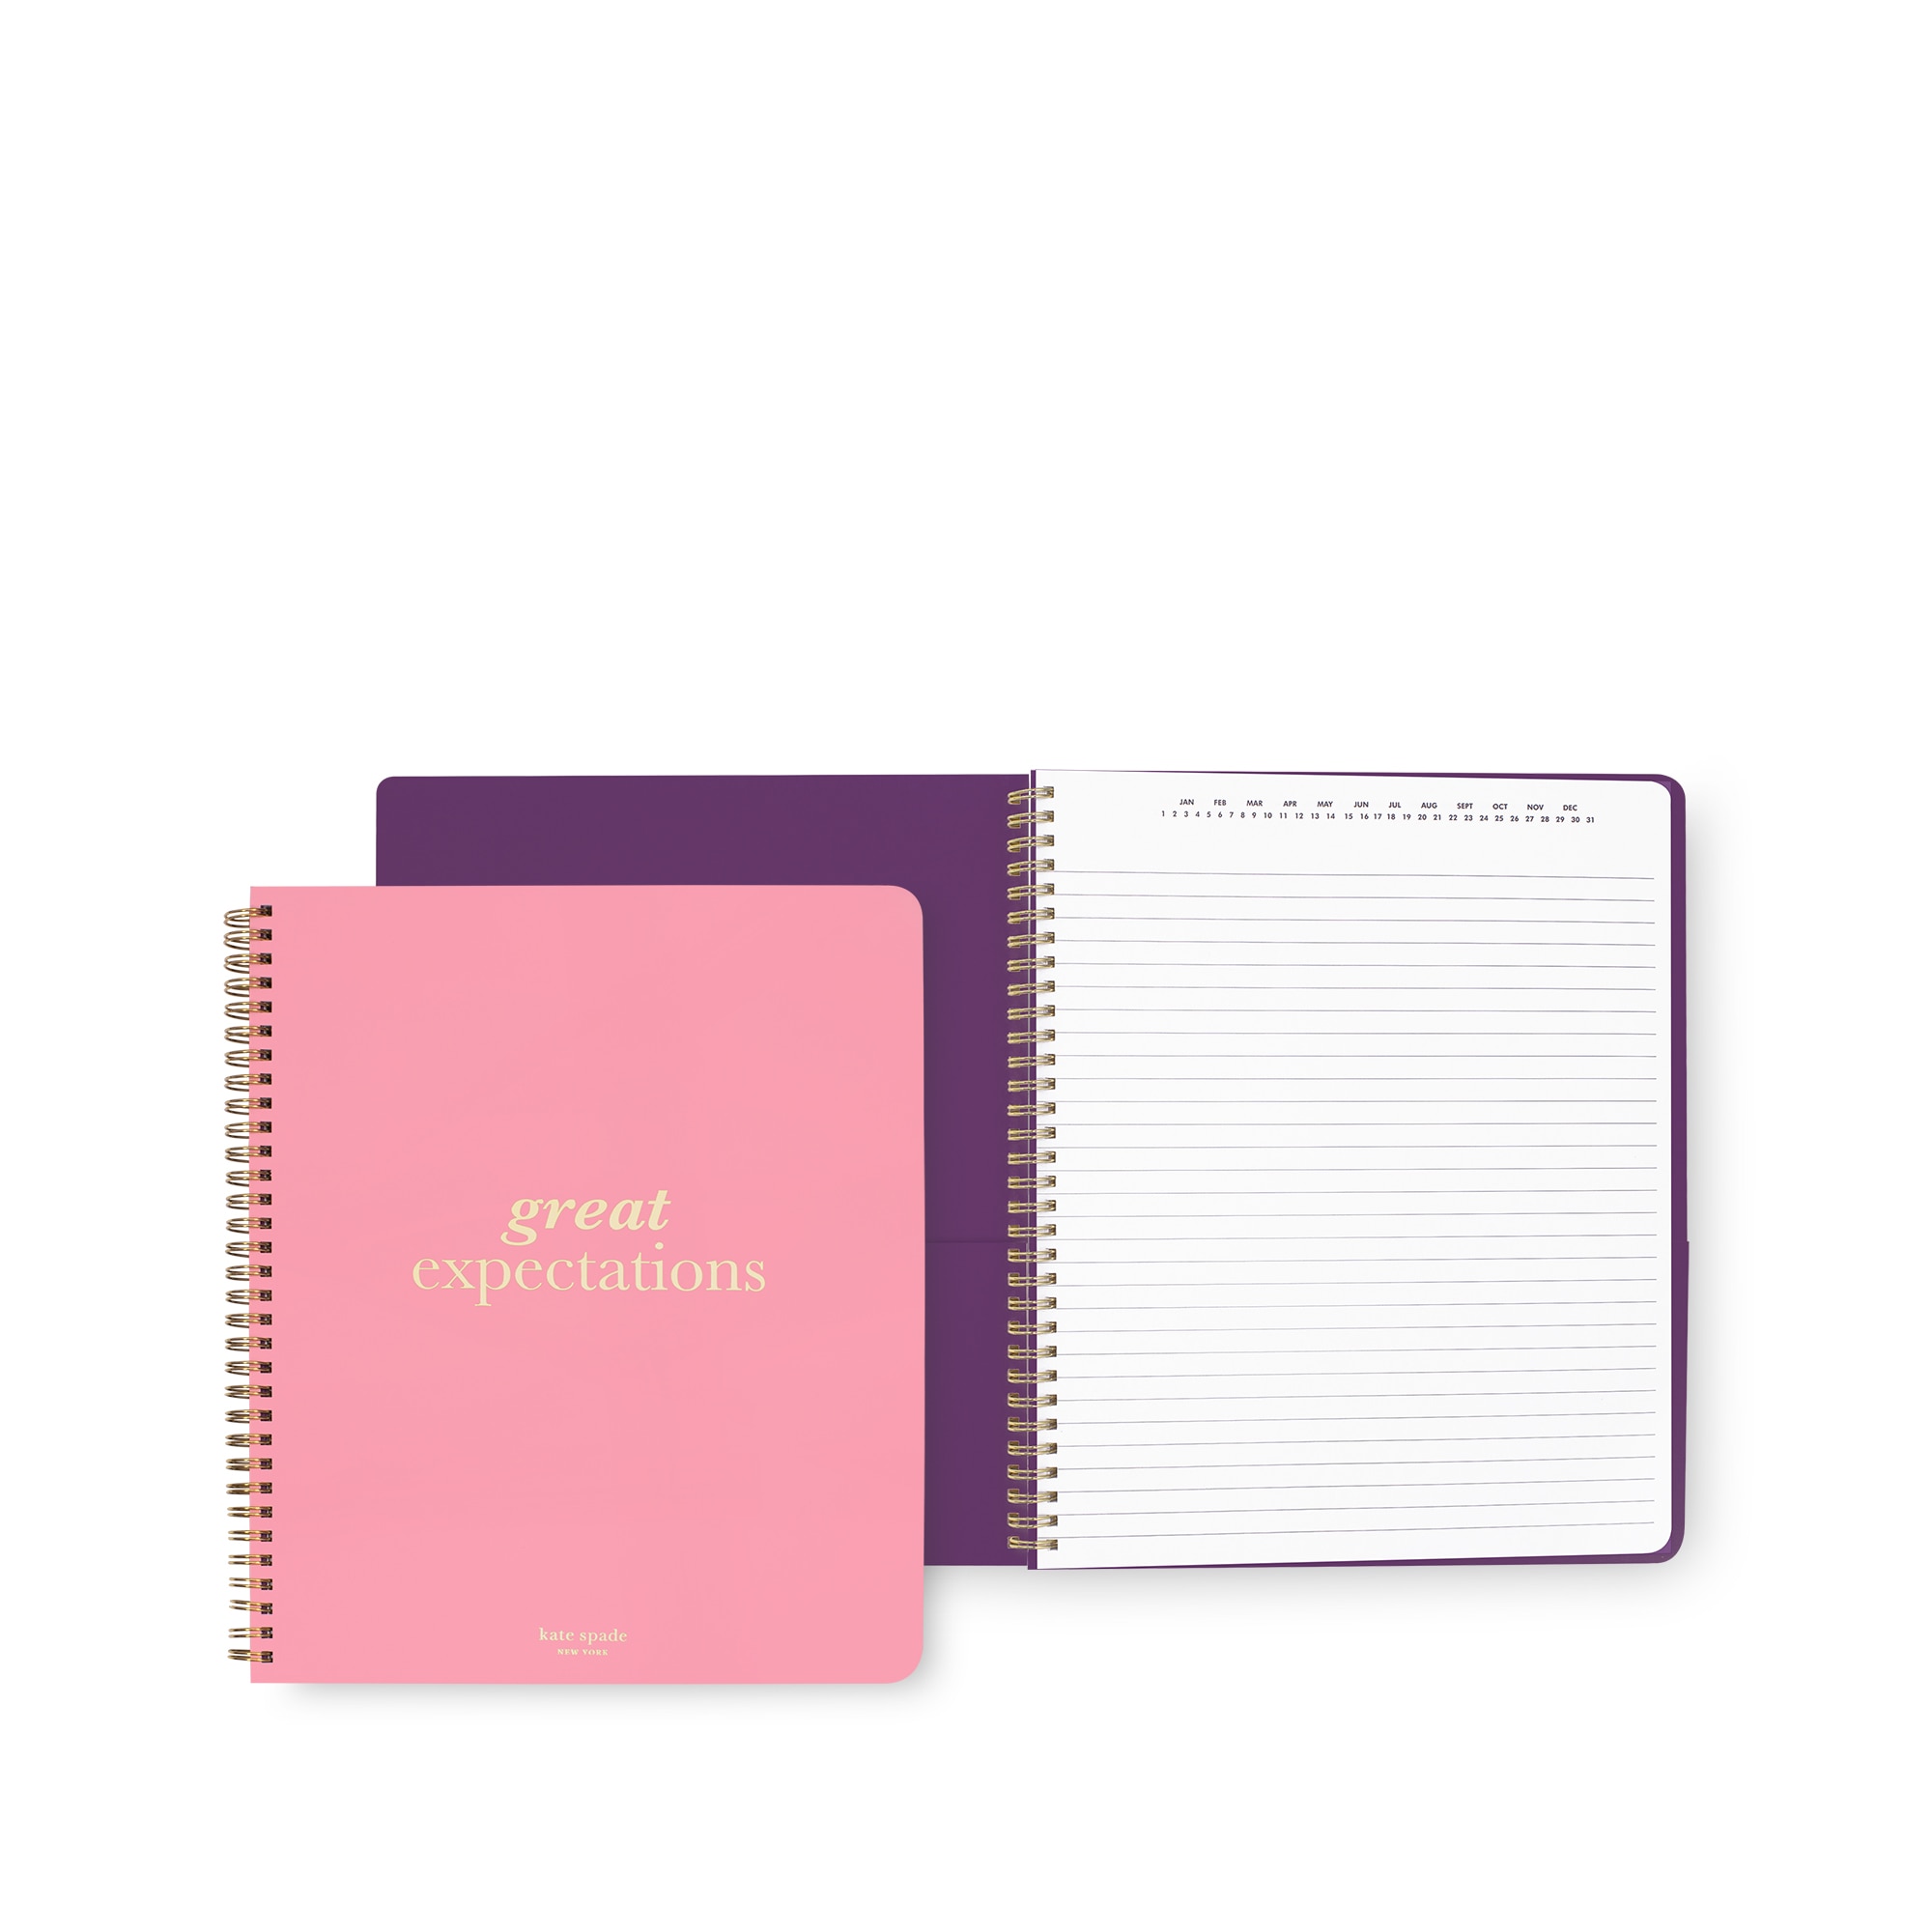 Kate Spade New York Large Spiral Notebook, Great Expectations